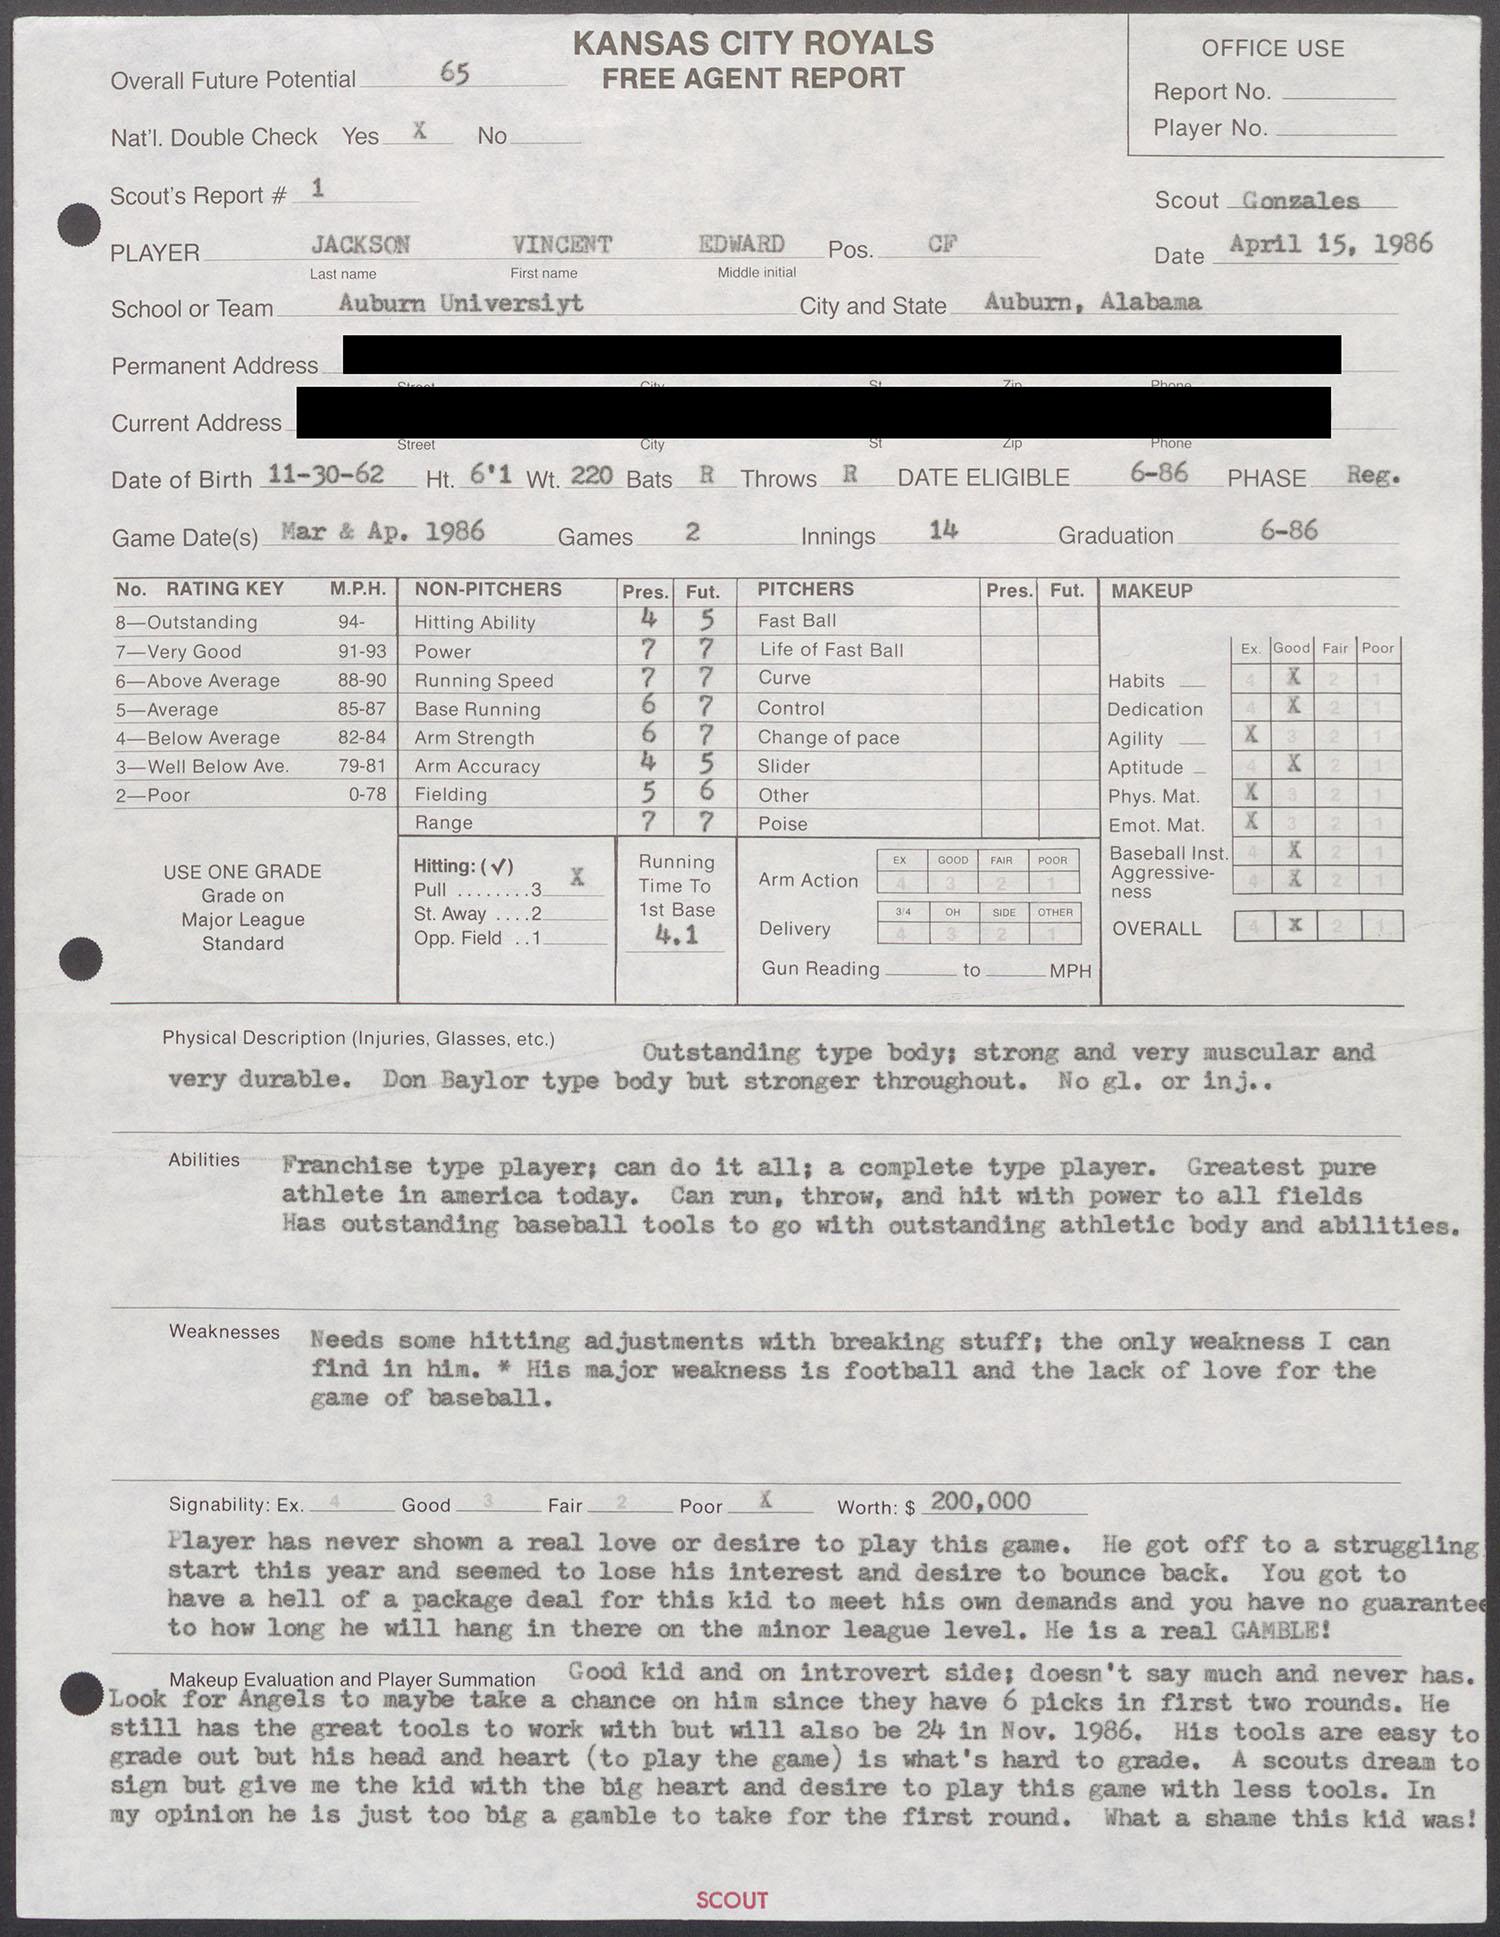 1986 scouting report of Bo Jackson. (National Baseball Hall of Fame and Museum)